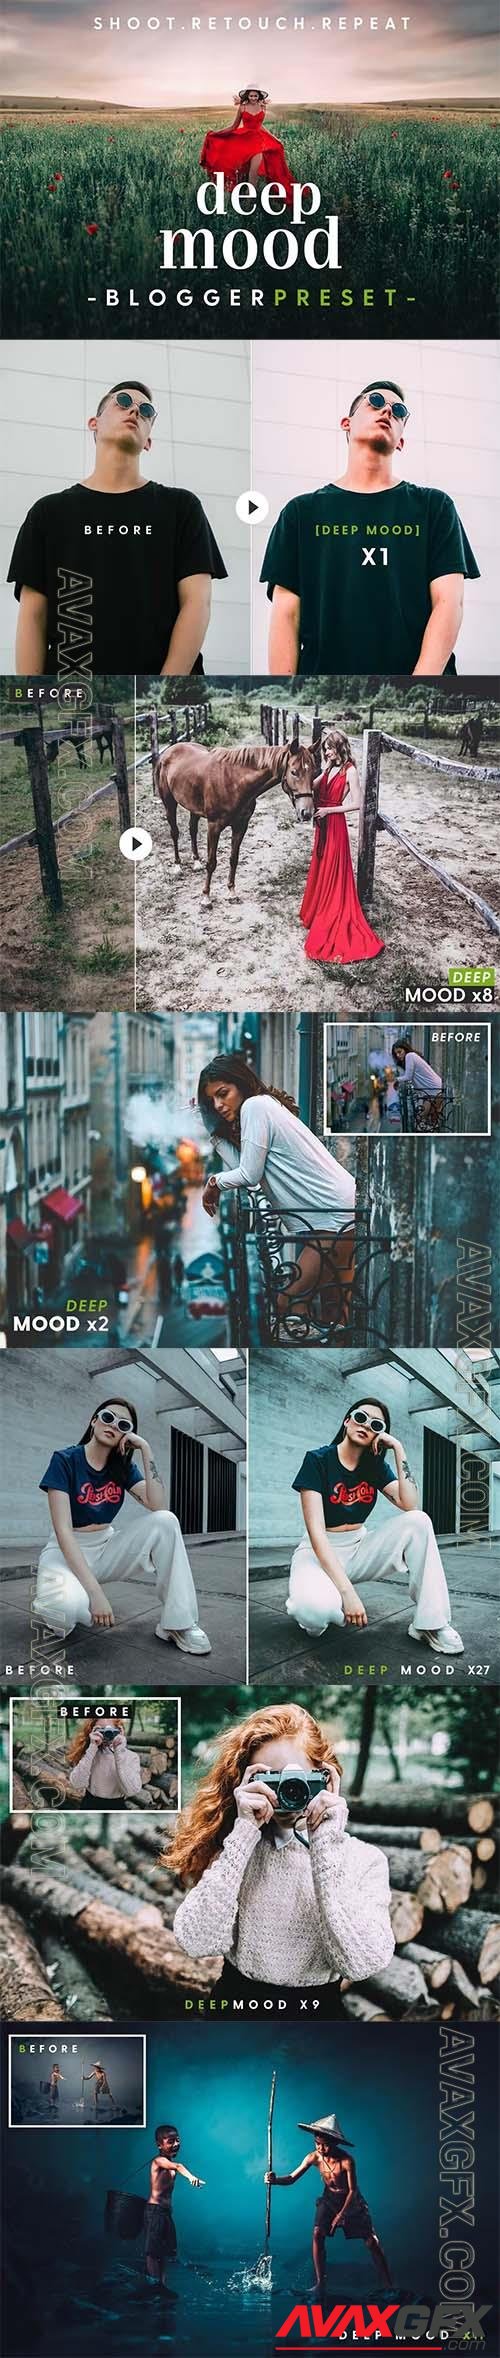 Deep Mood - Actions and Presets